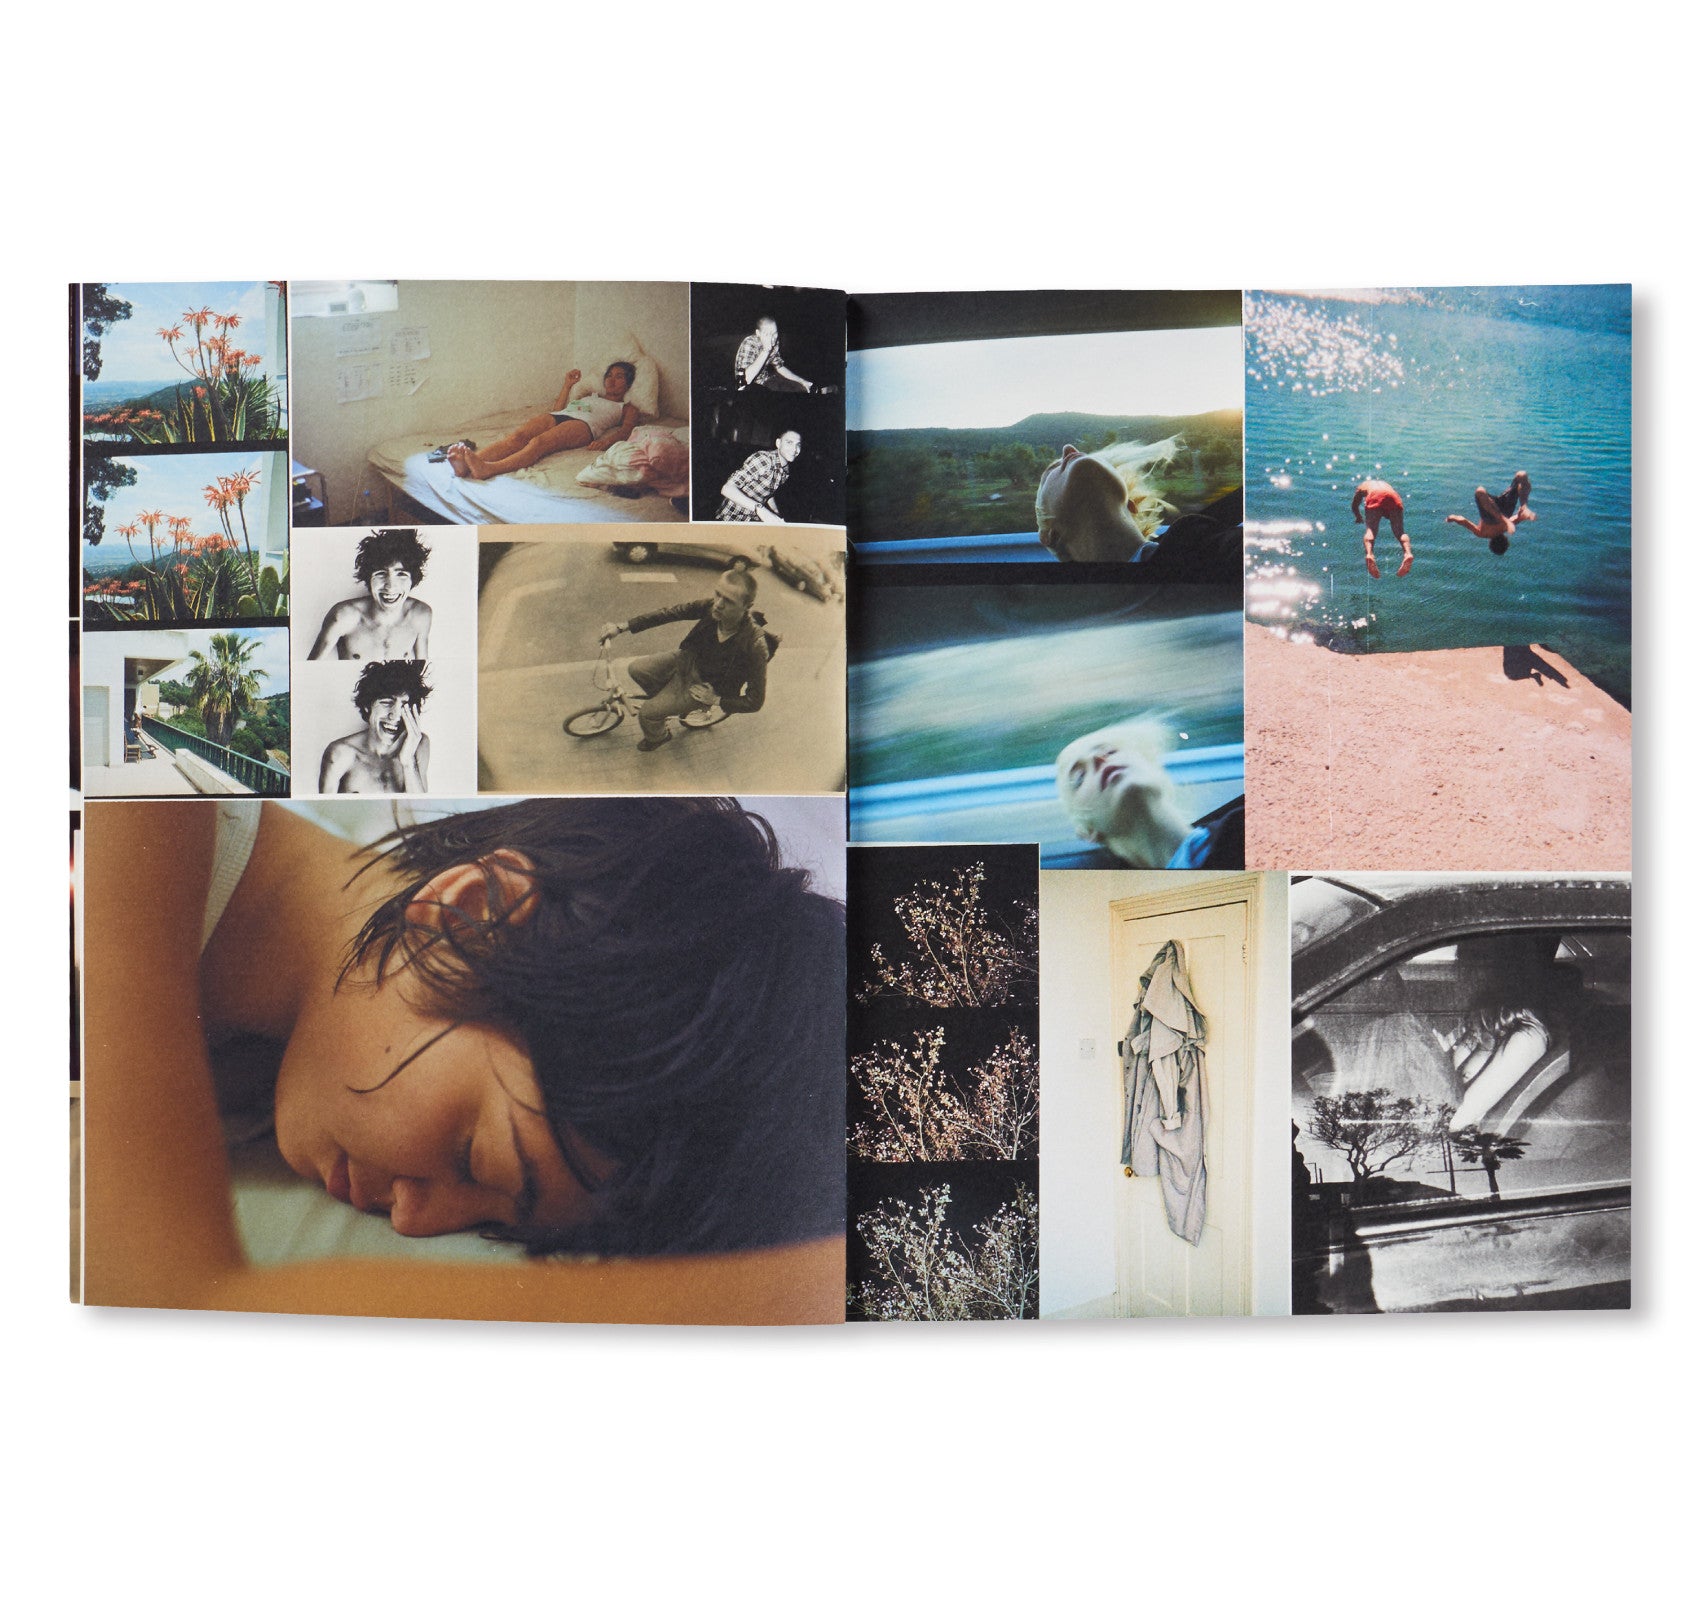 THE OTHER DAY by Quentin de Briey [SPECIAL EDITION]